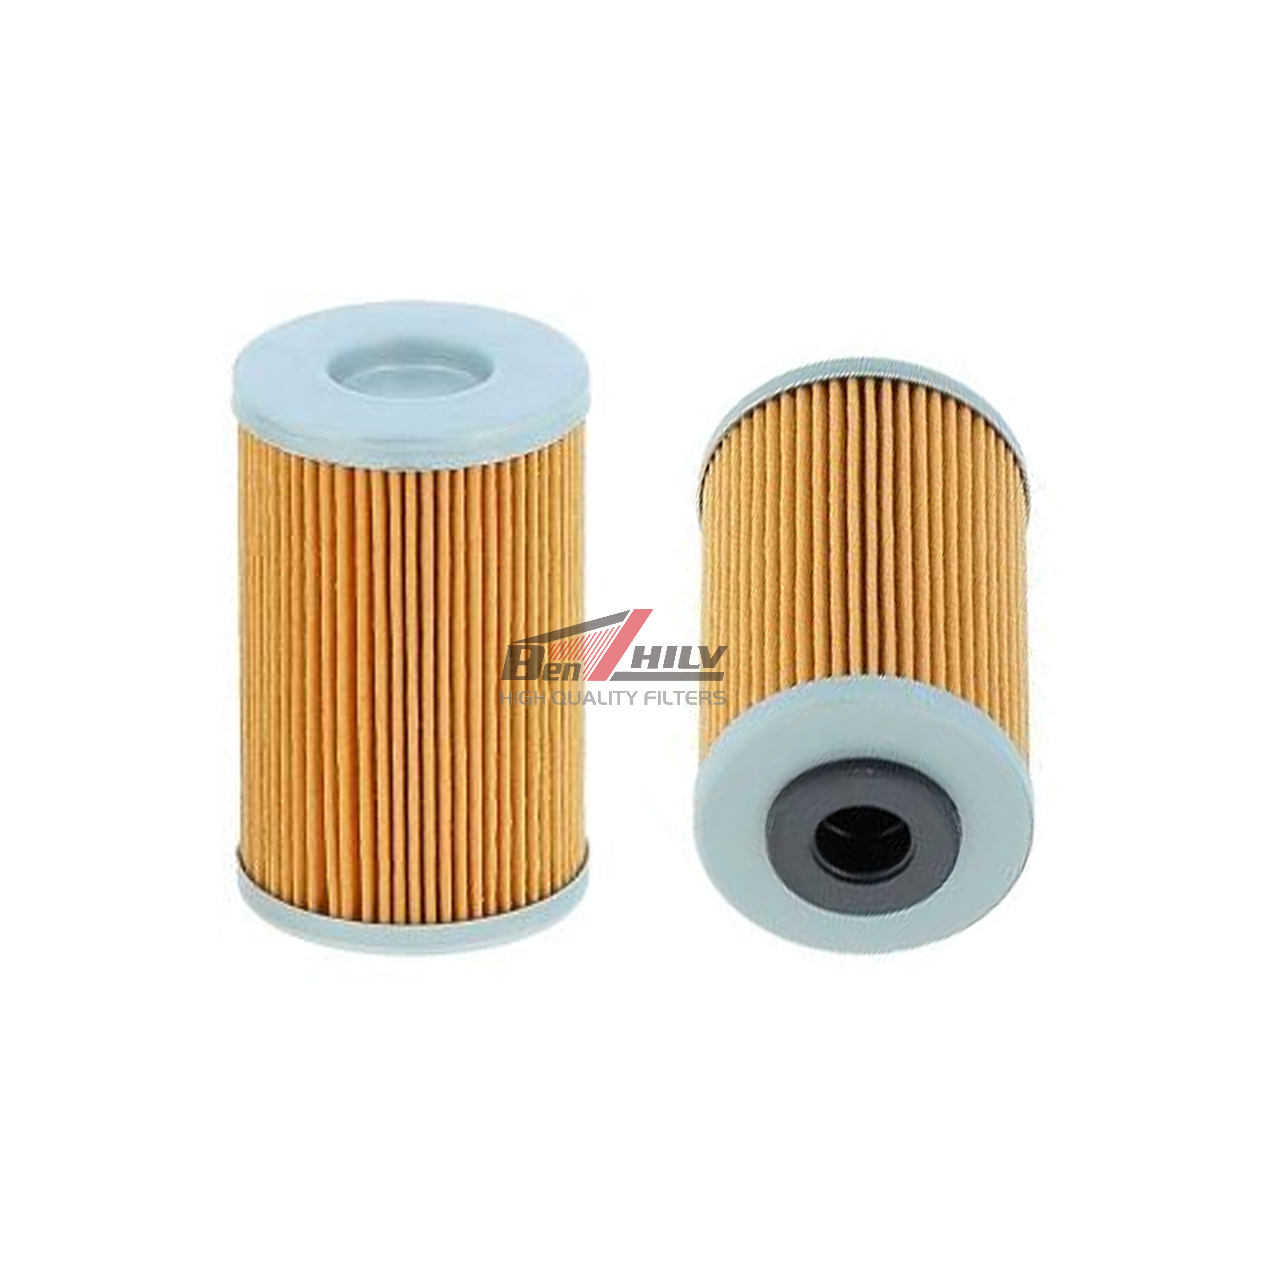 HF155 LUBRICATE THE OIL FILTER ELEMENT